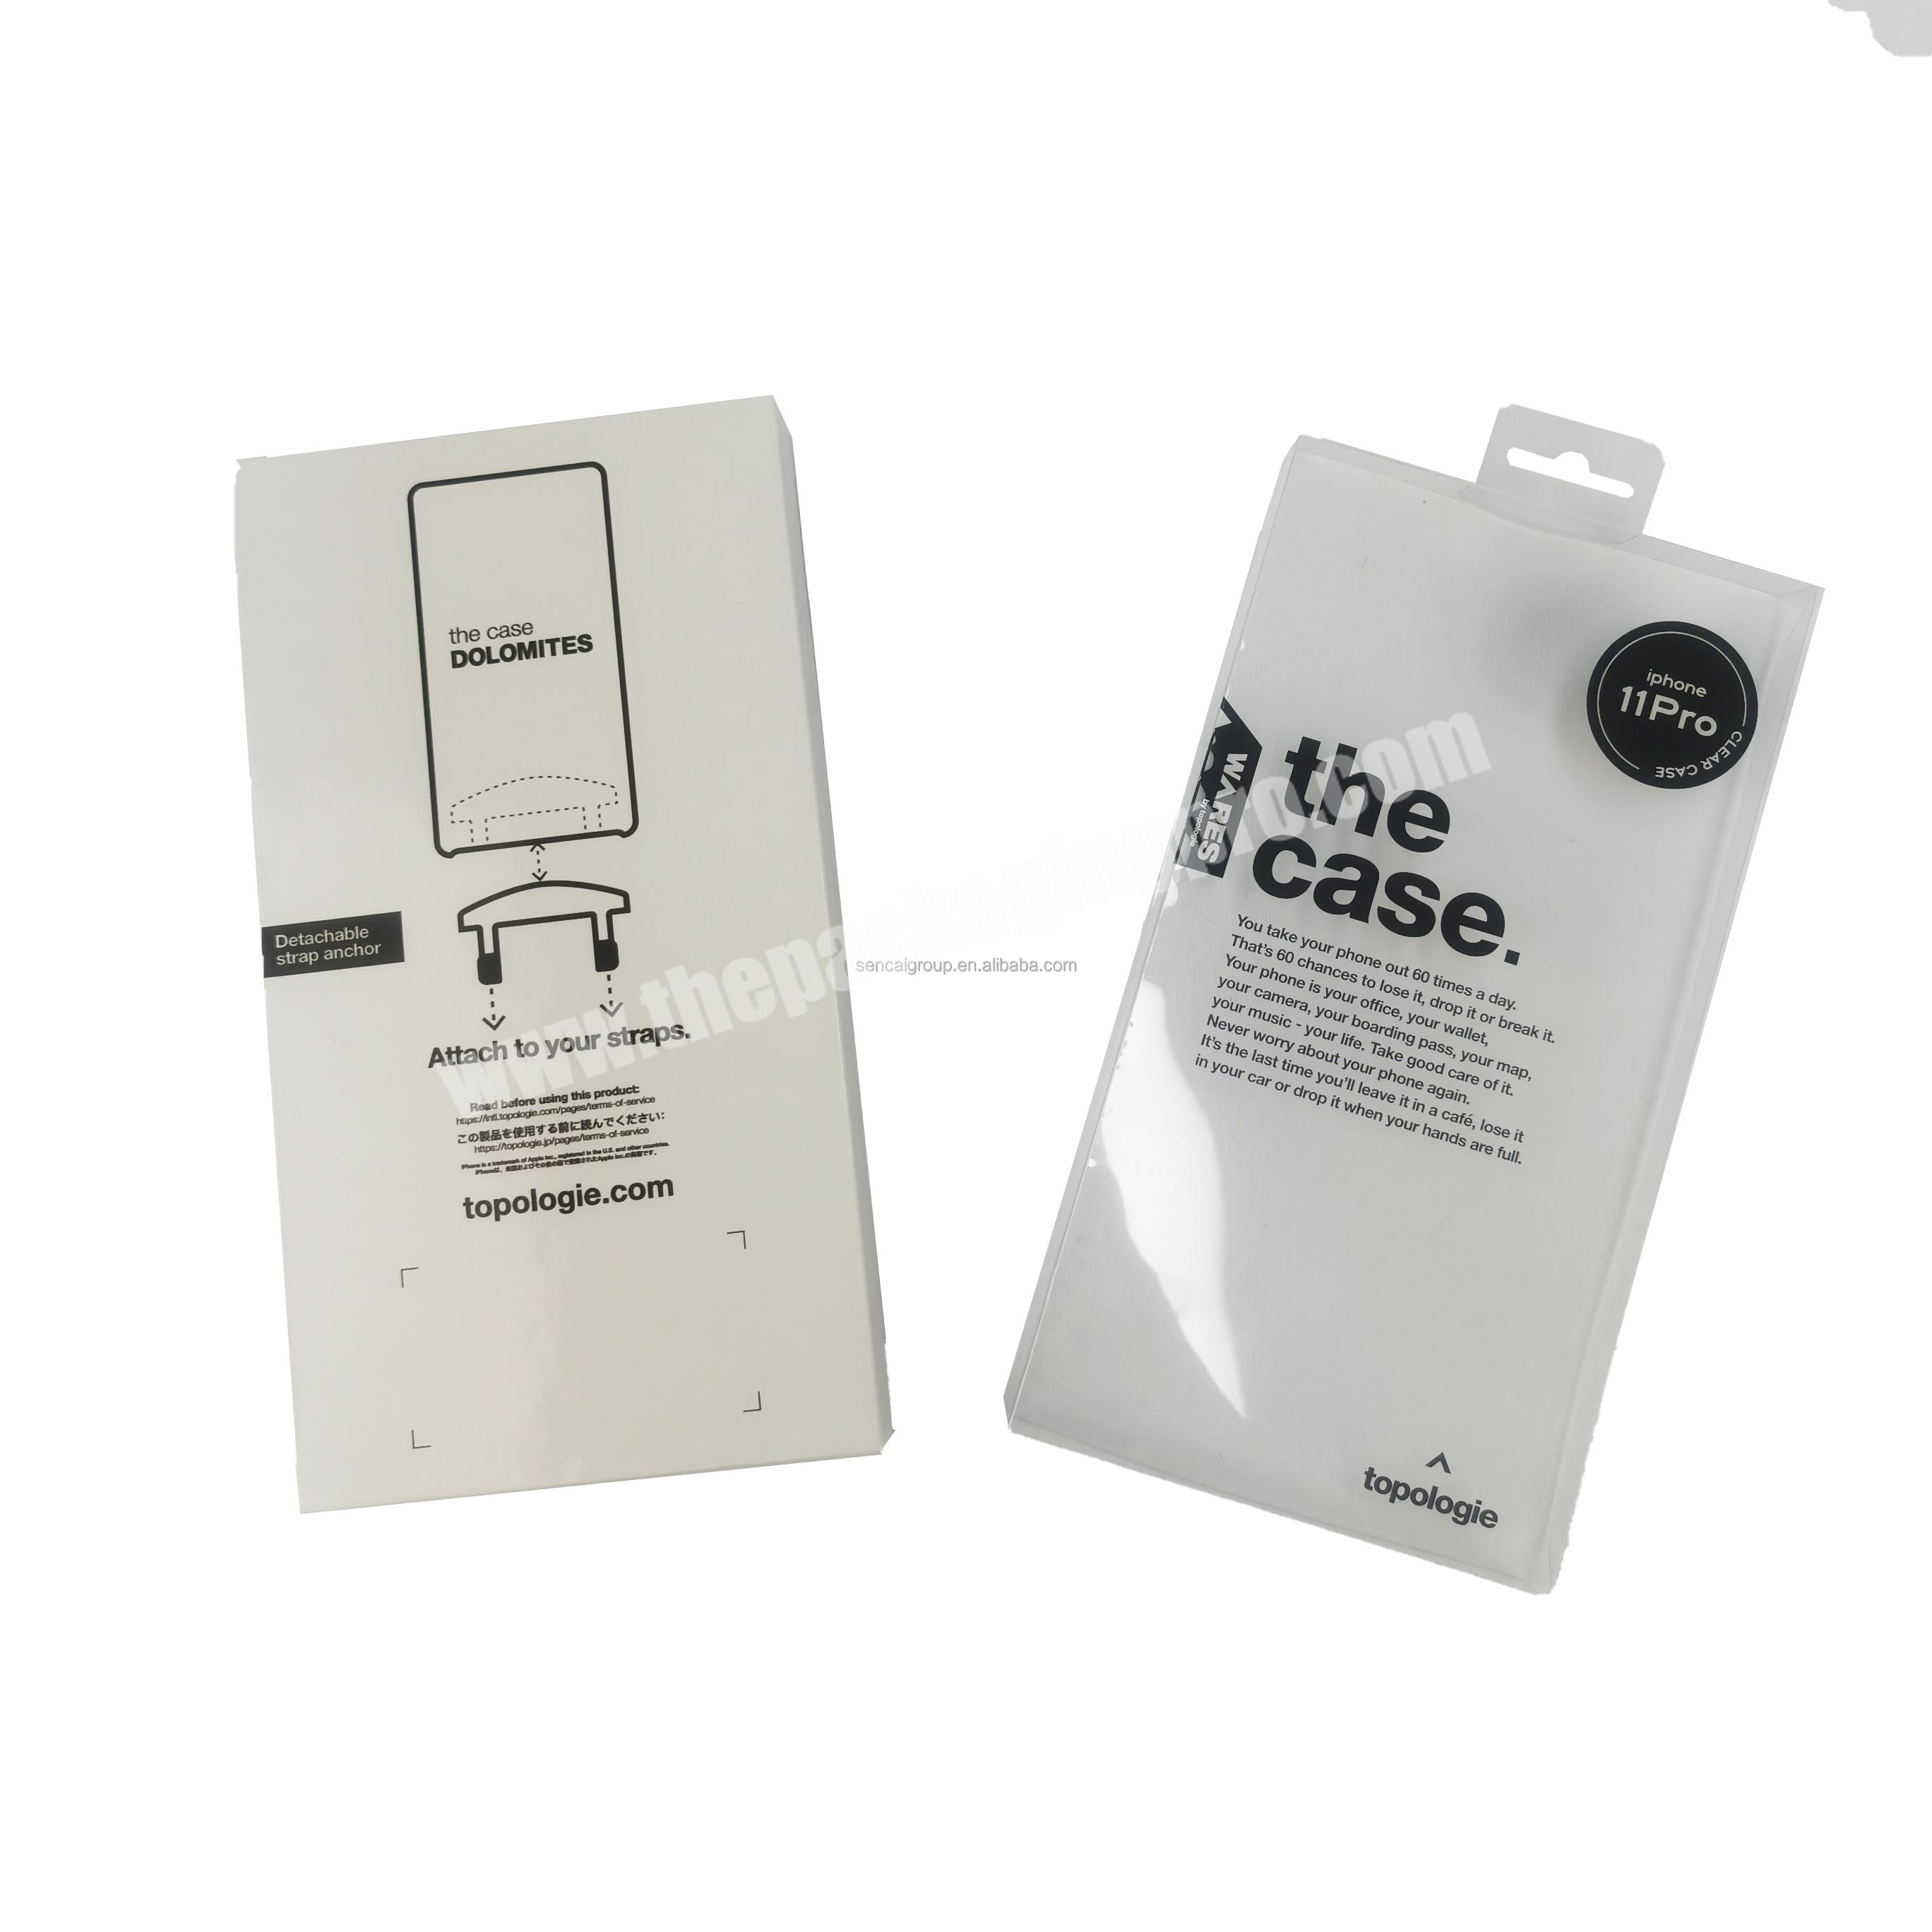 SENCAI Recycled Custom Designing Phone Case Packaging boxes Custom With Your Logo